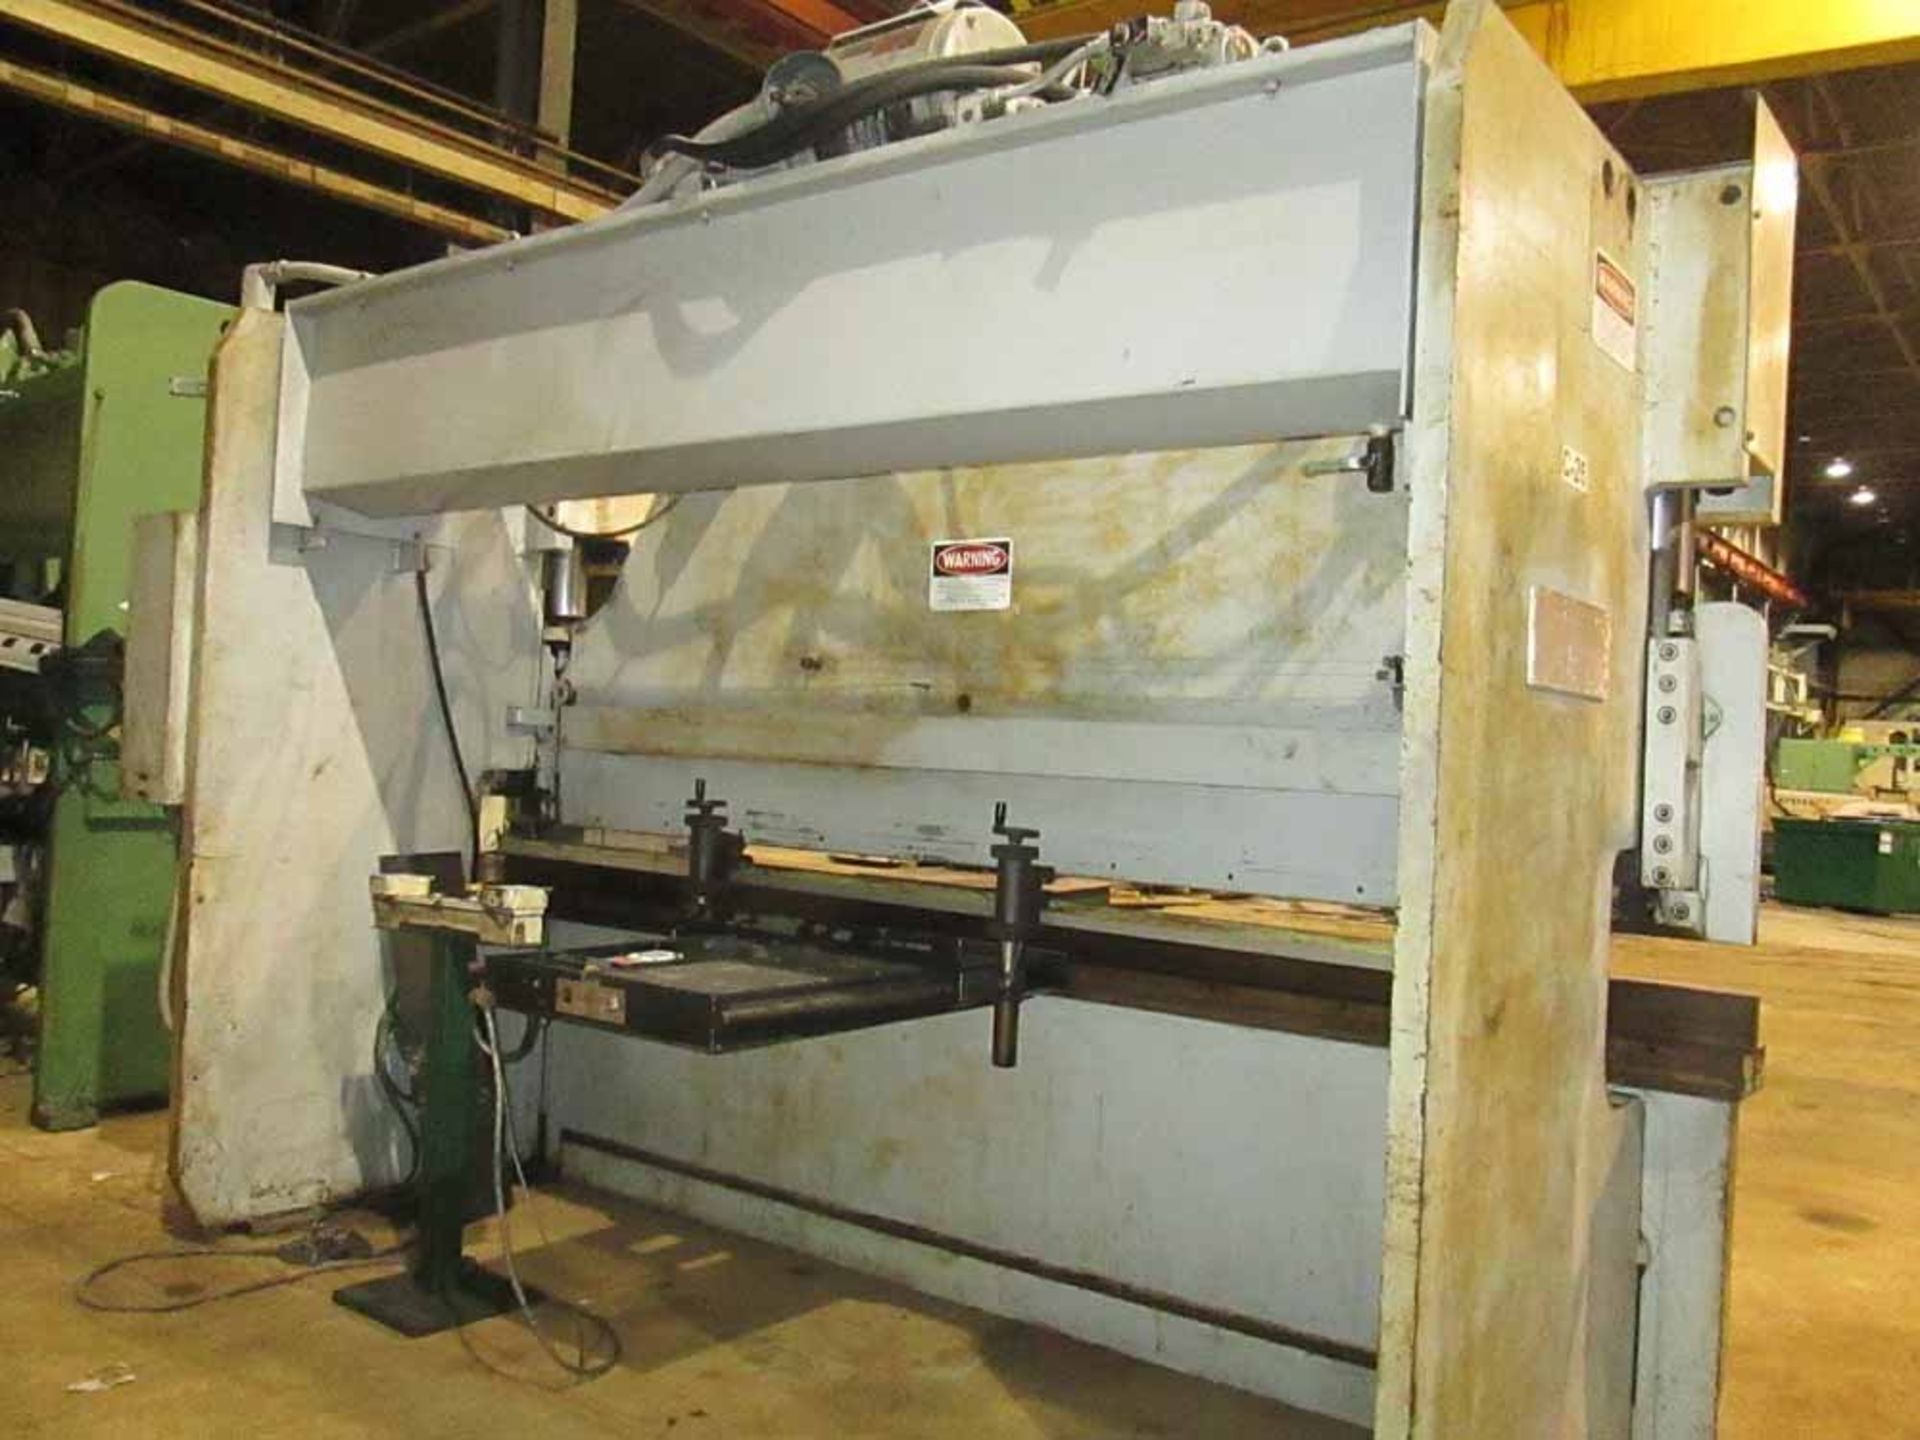 Pacific CNC 2 Axis Hyd. Press Brake, 110-Ton x 12' - Located In Painesville, OH - 6426 - Image 4 of 12